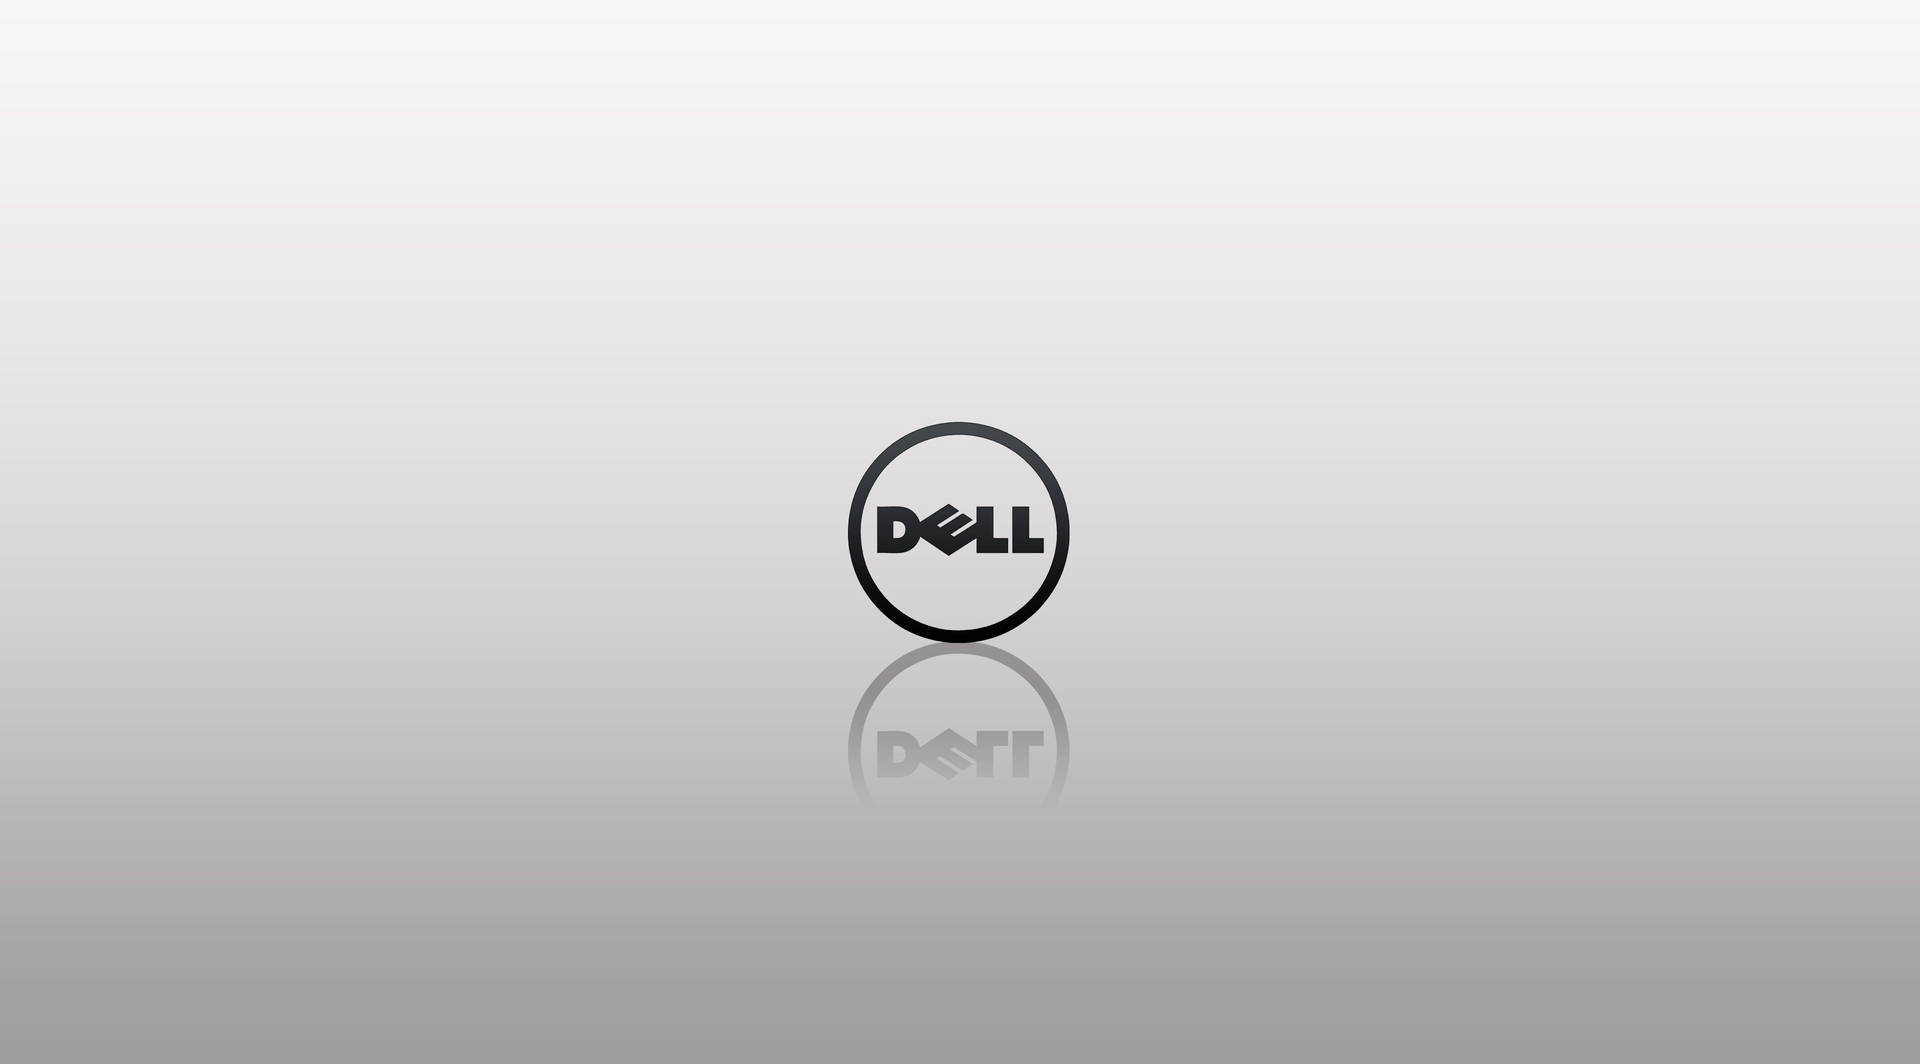 Dell 3840X2128 Wallpaper and Background Image